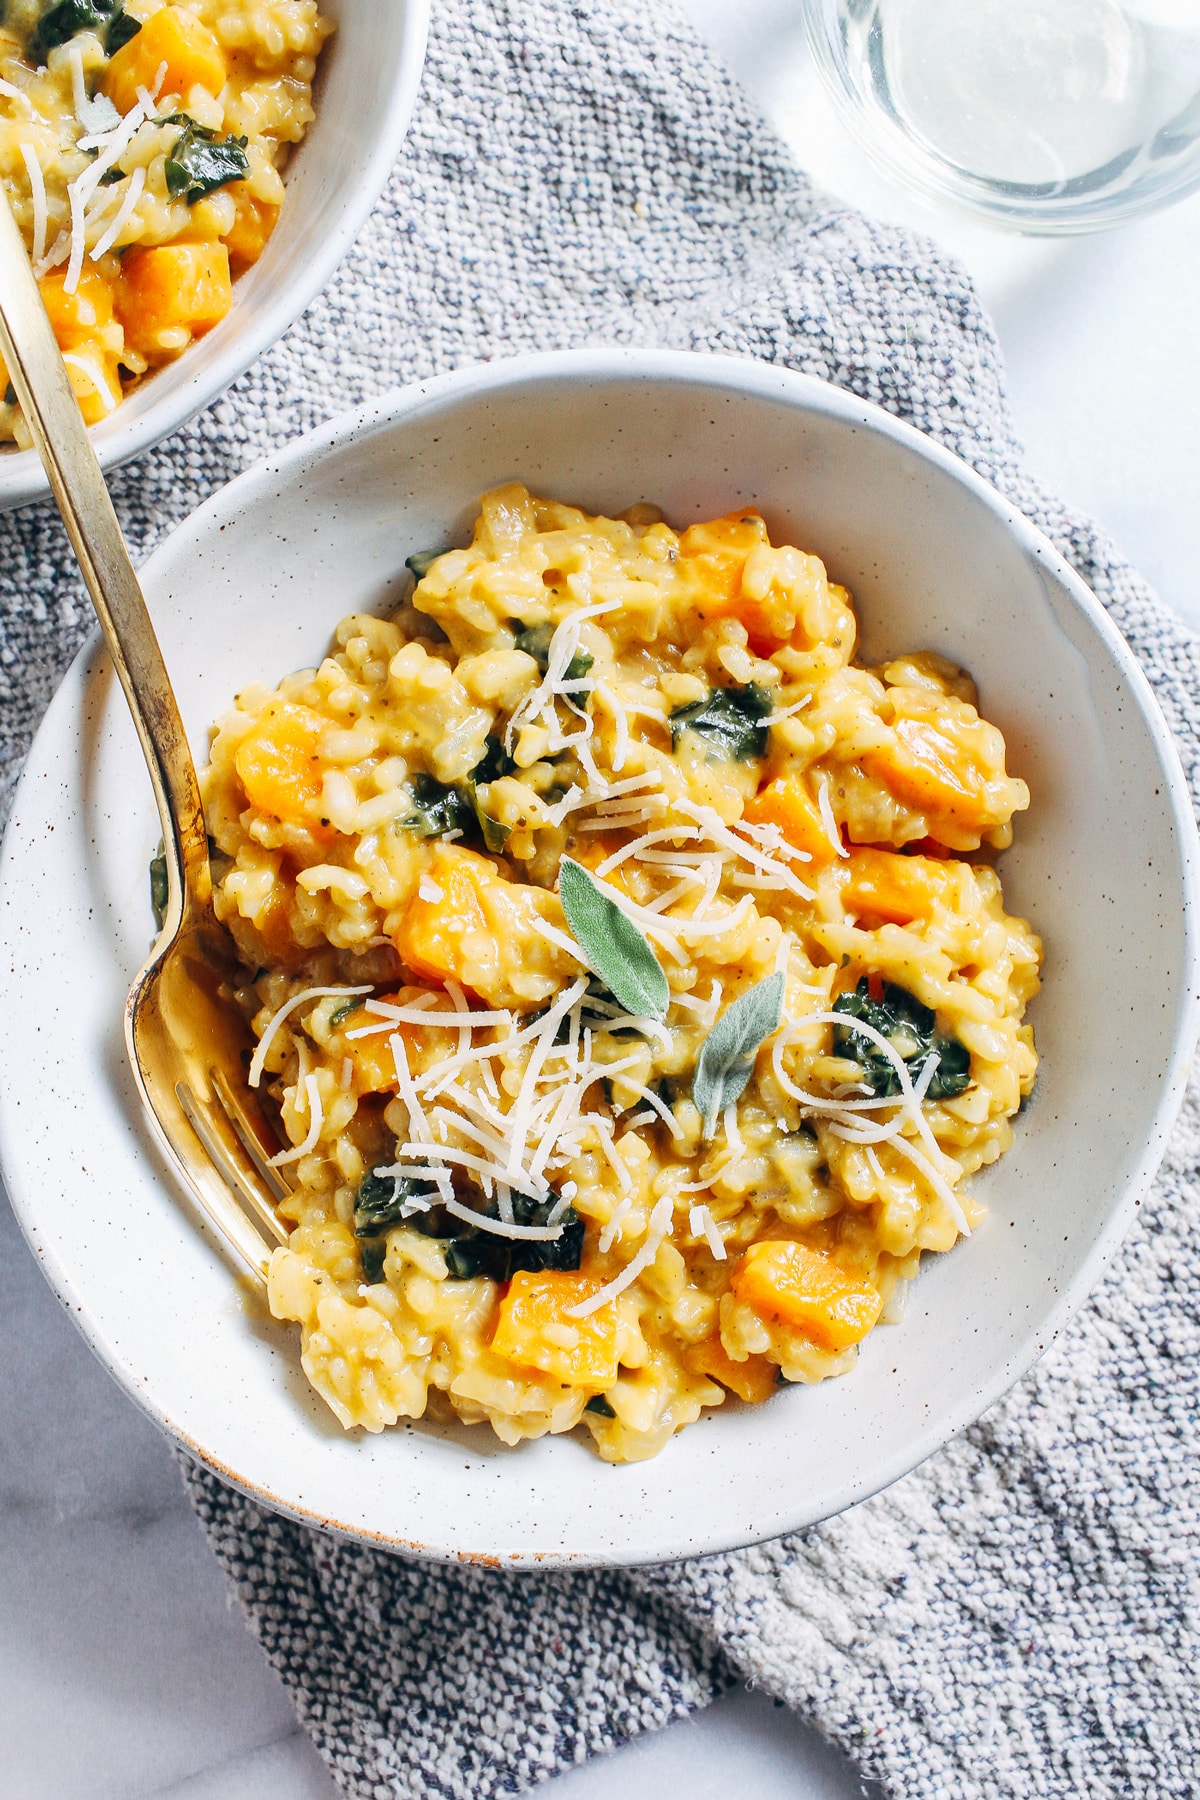 Butternut squash and kale risotto